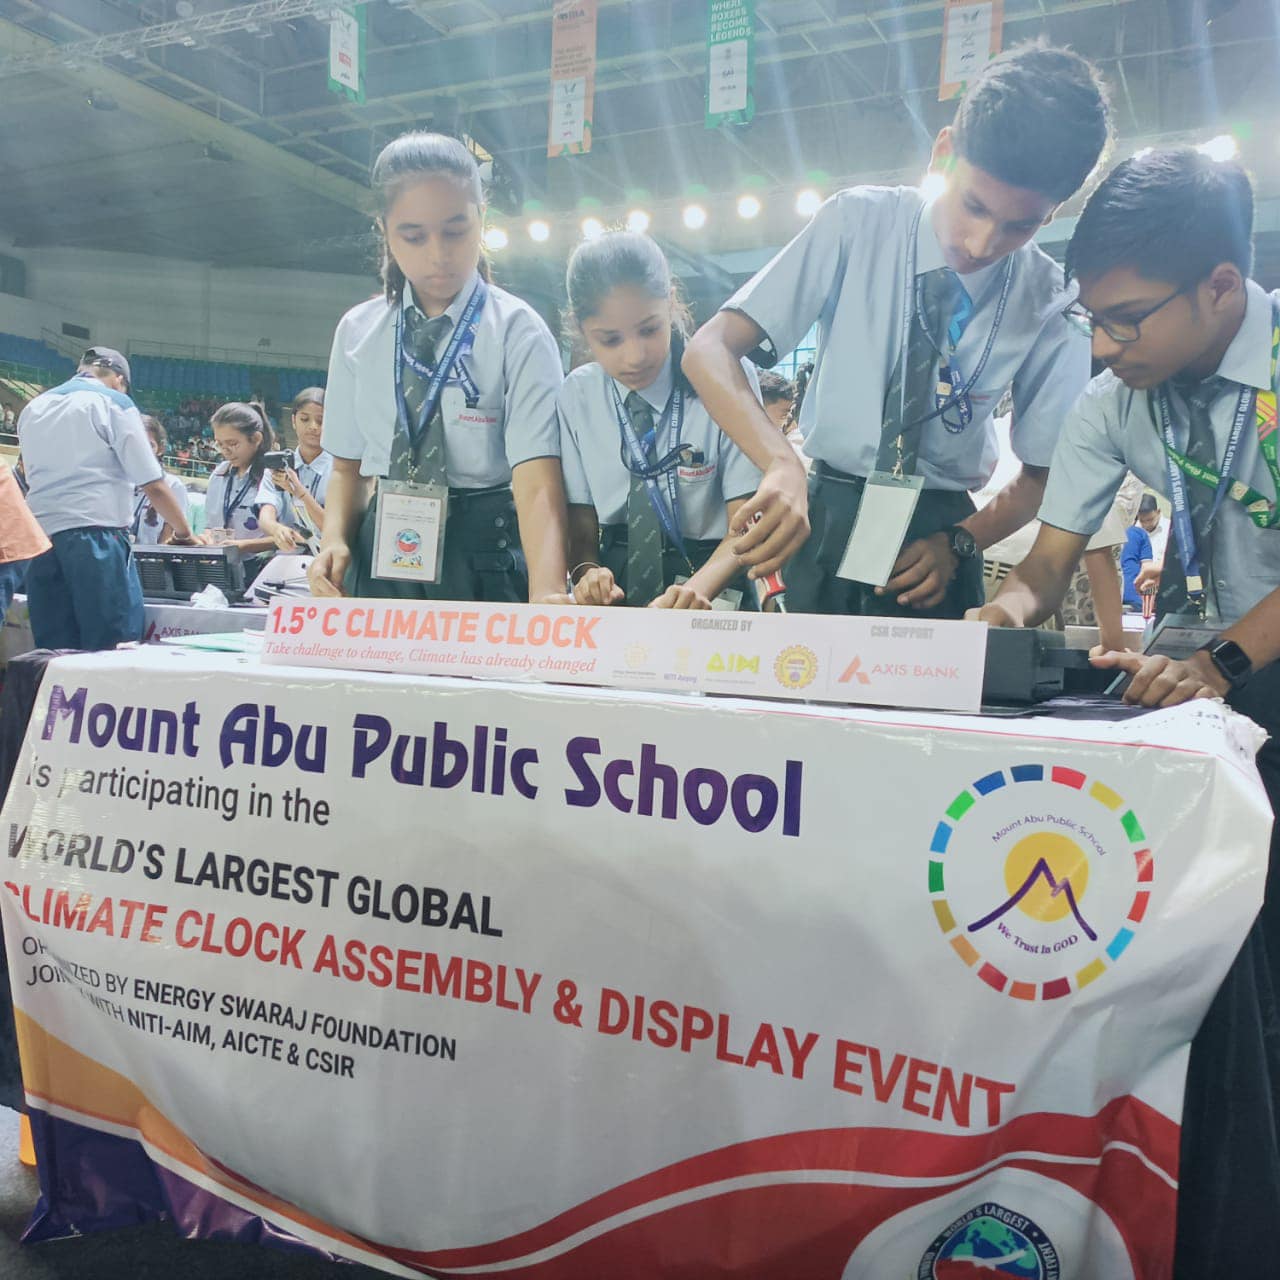 GLOBAL CLIMATE CLOCK ASSEMBLY AND DISPLAY EVENT